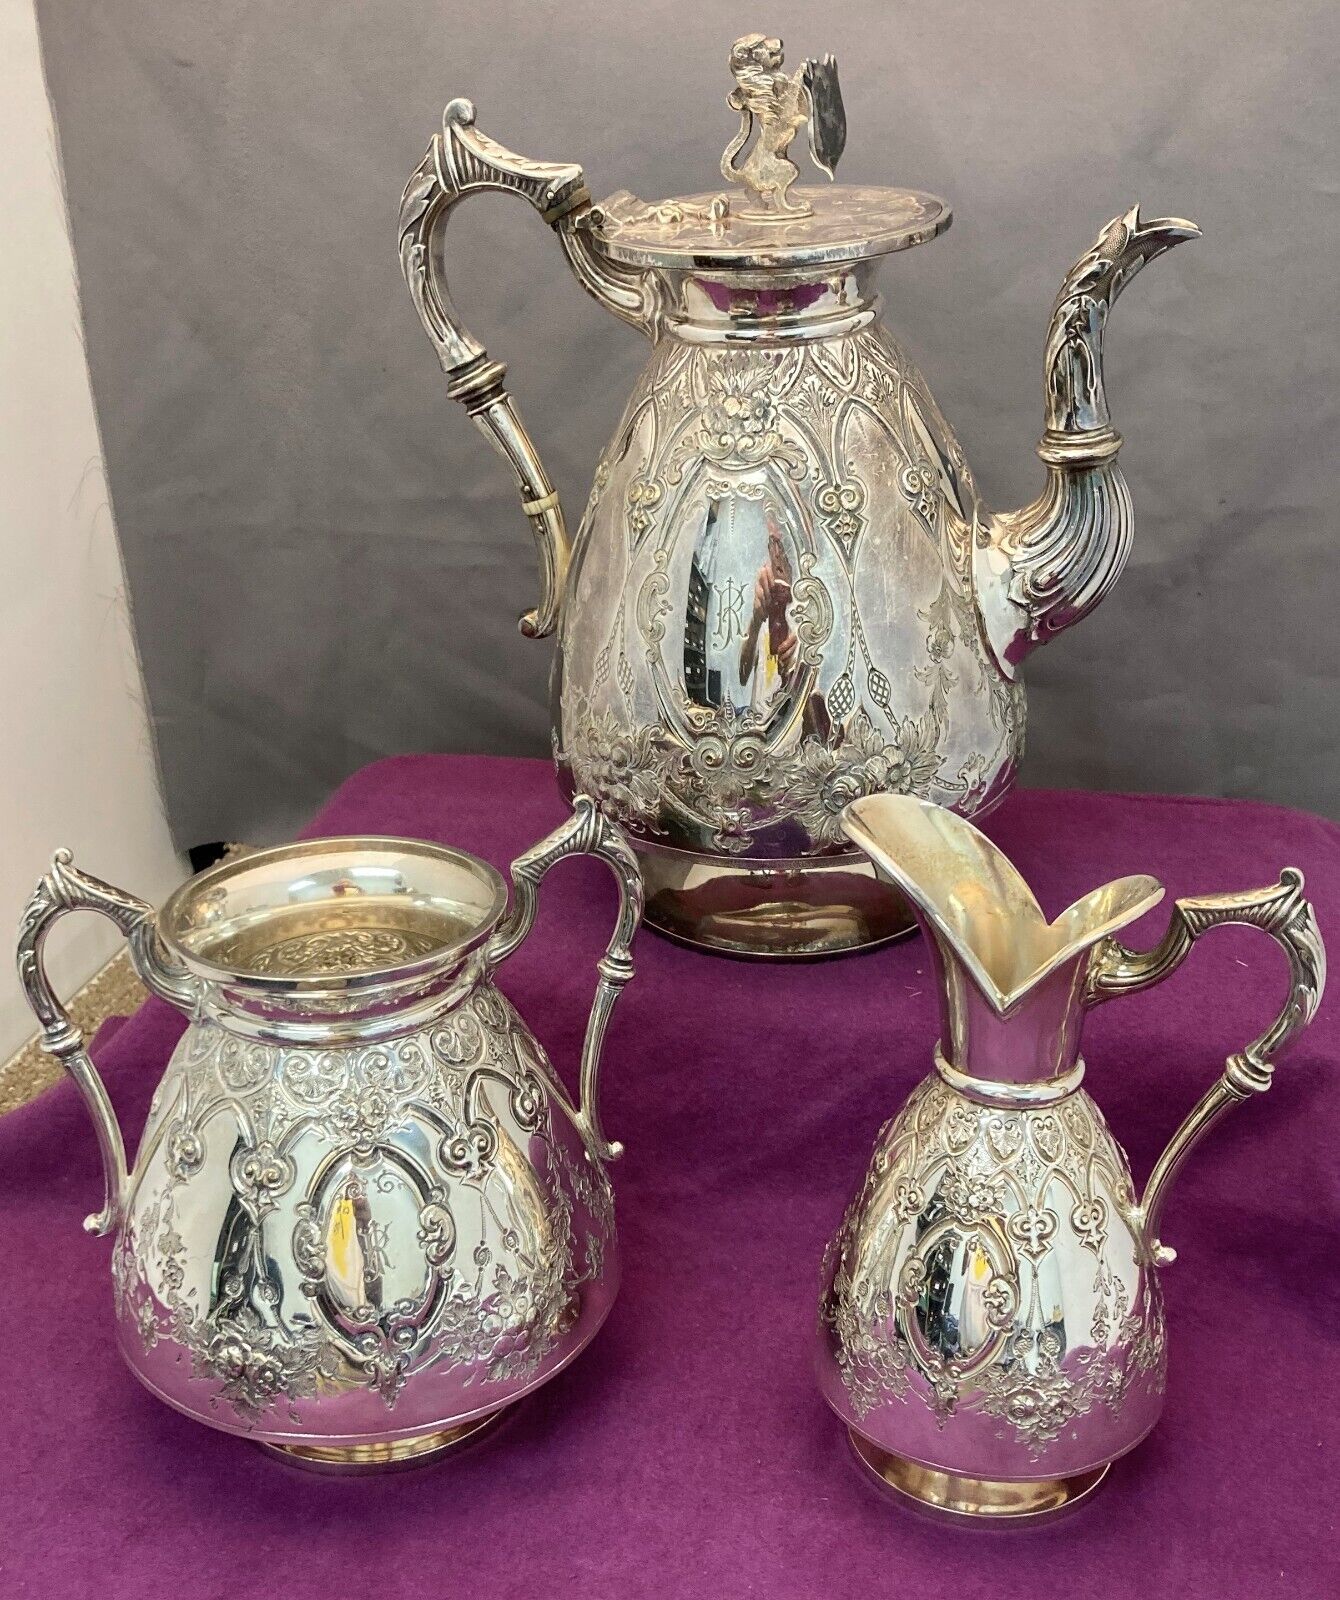 WALKER & HALL AESTHETIC MOVEMENT EP A1 SILVER-PLATED 3 PIECE TEA SET #5075